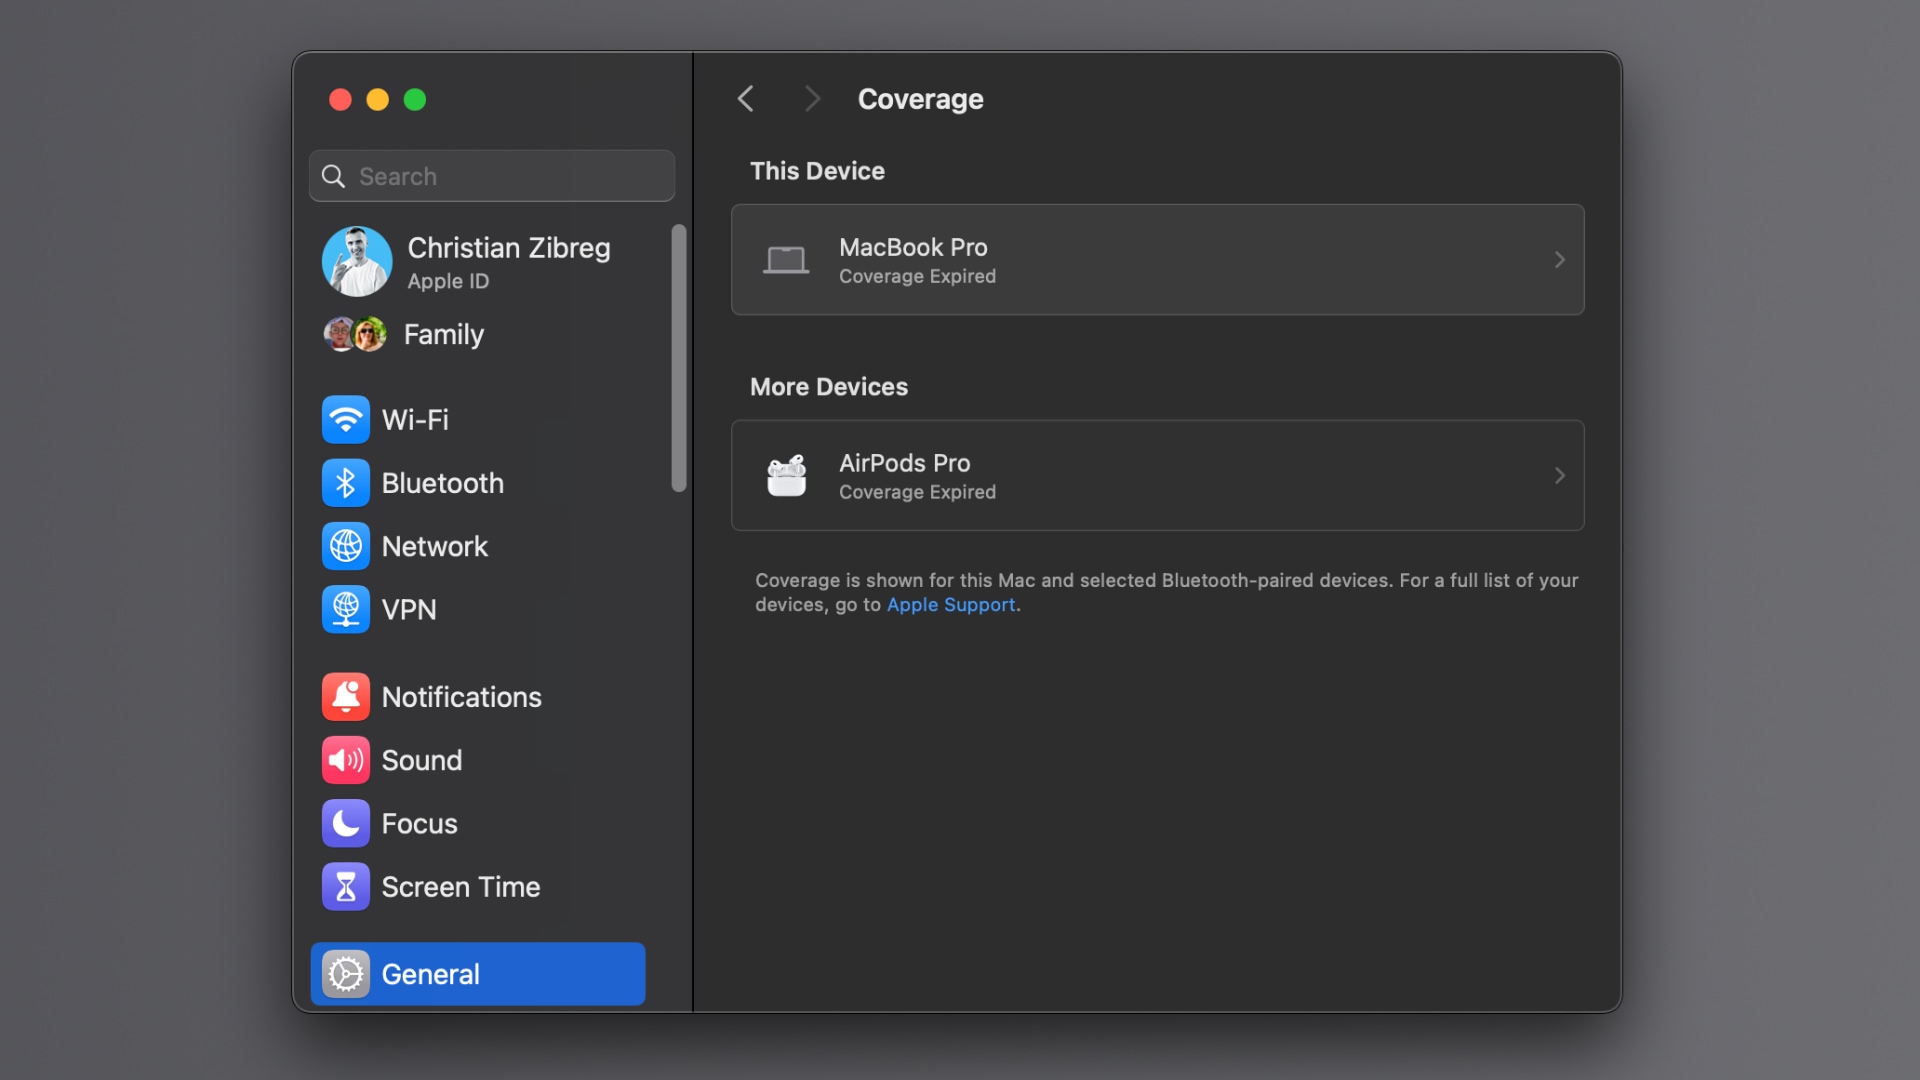 macOS 14.1 adds a dedicated warranty Coverage section to System Settings